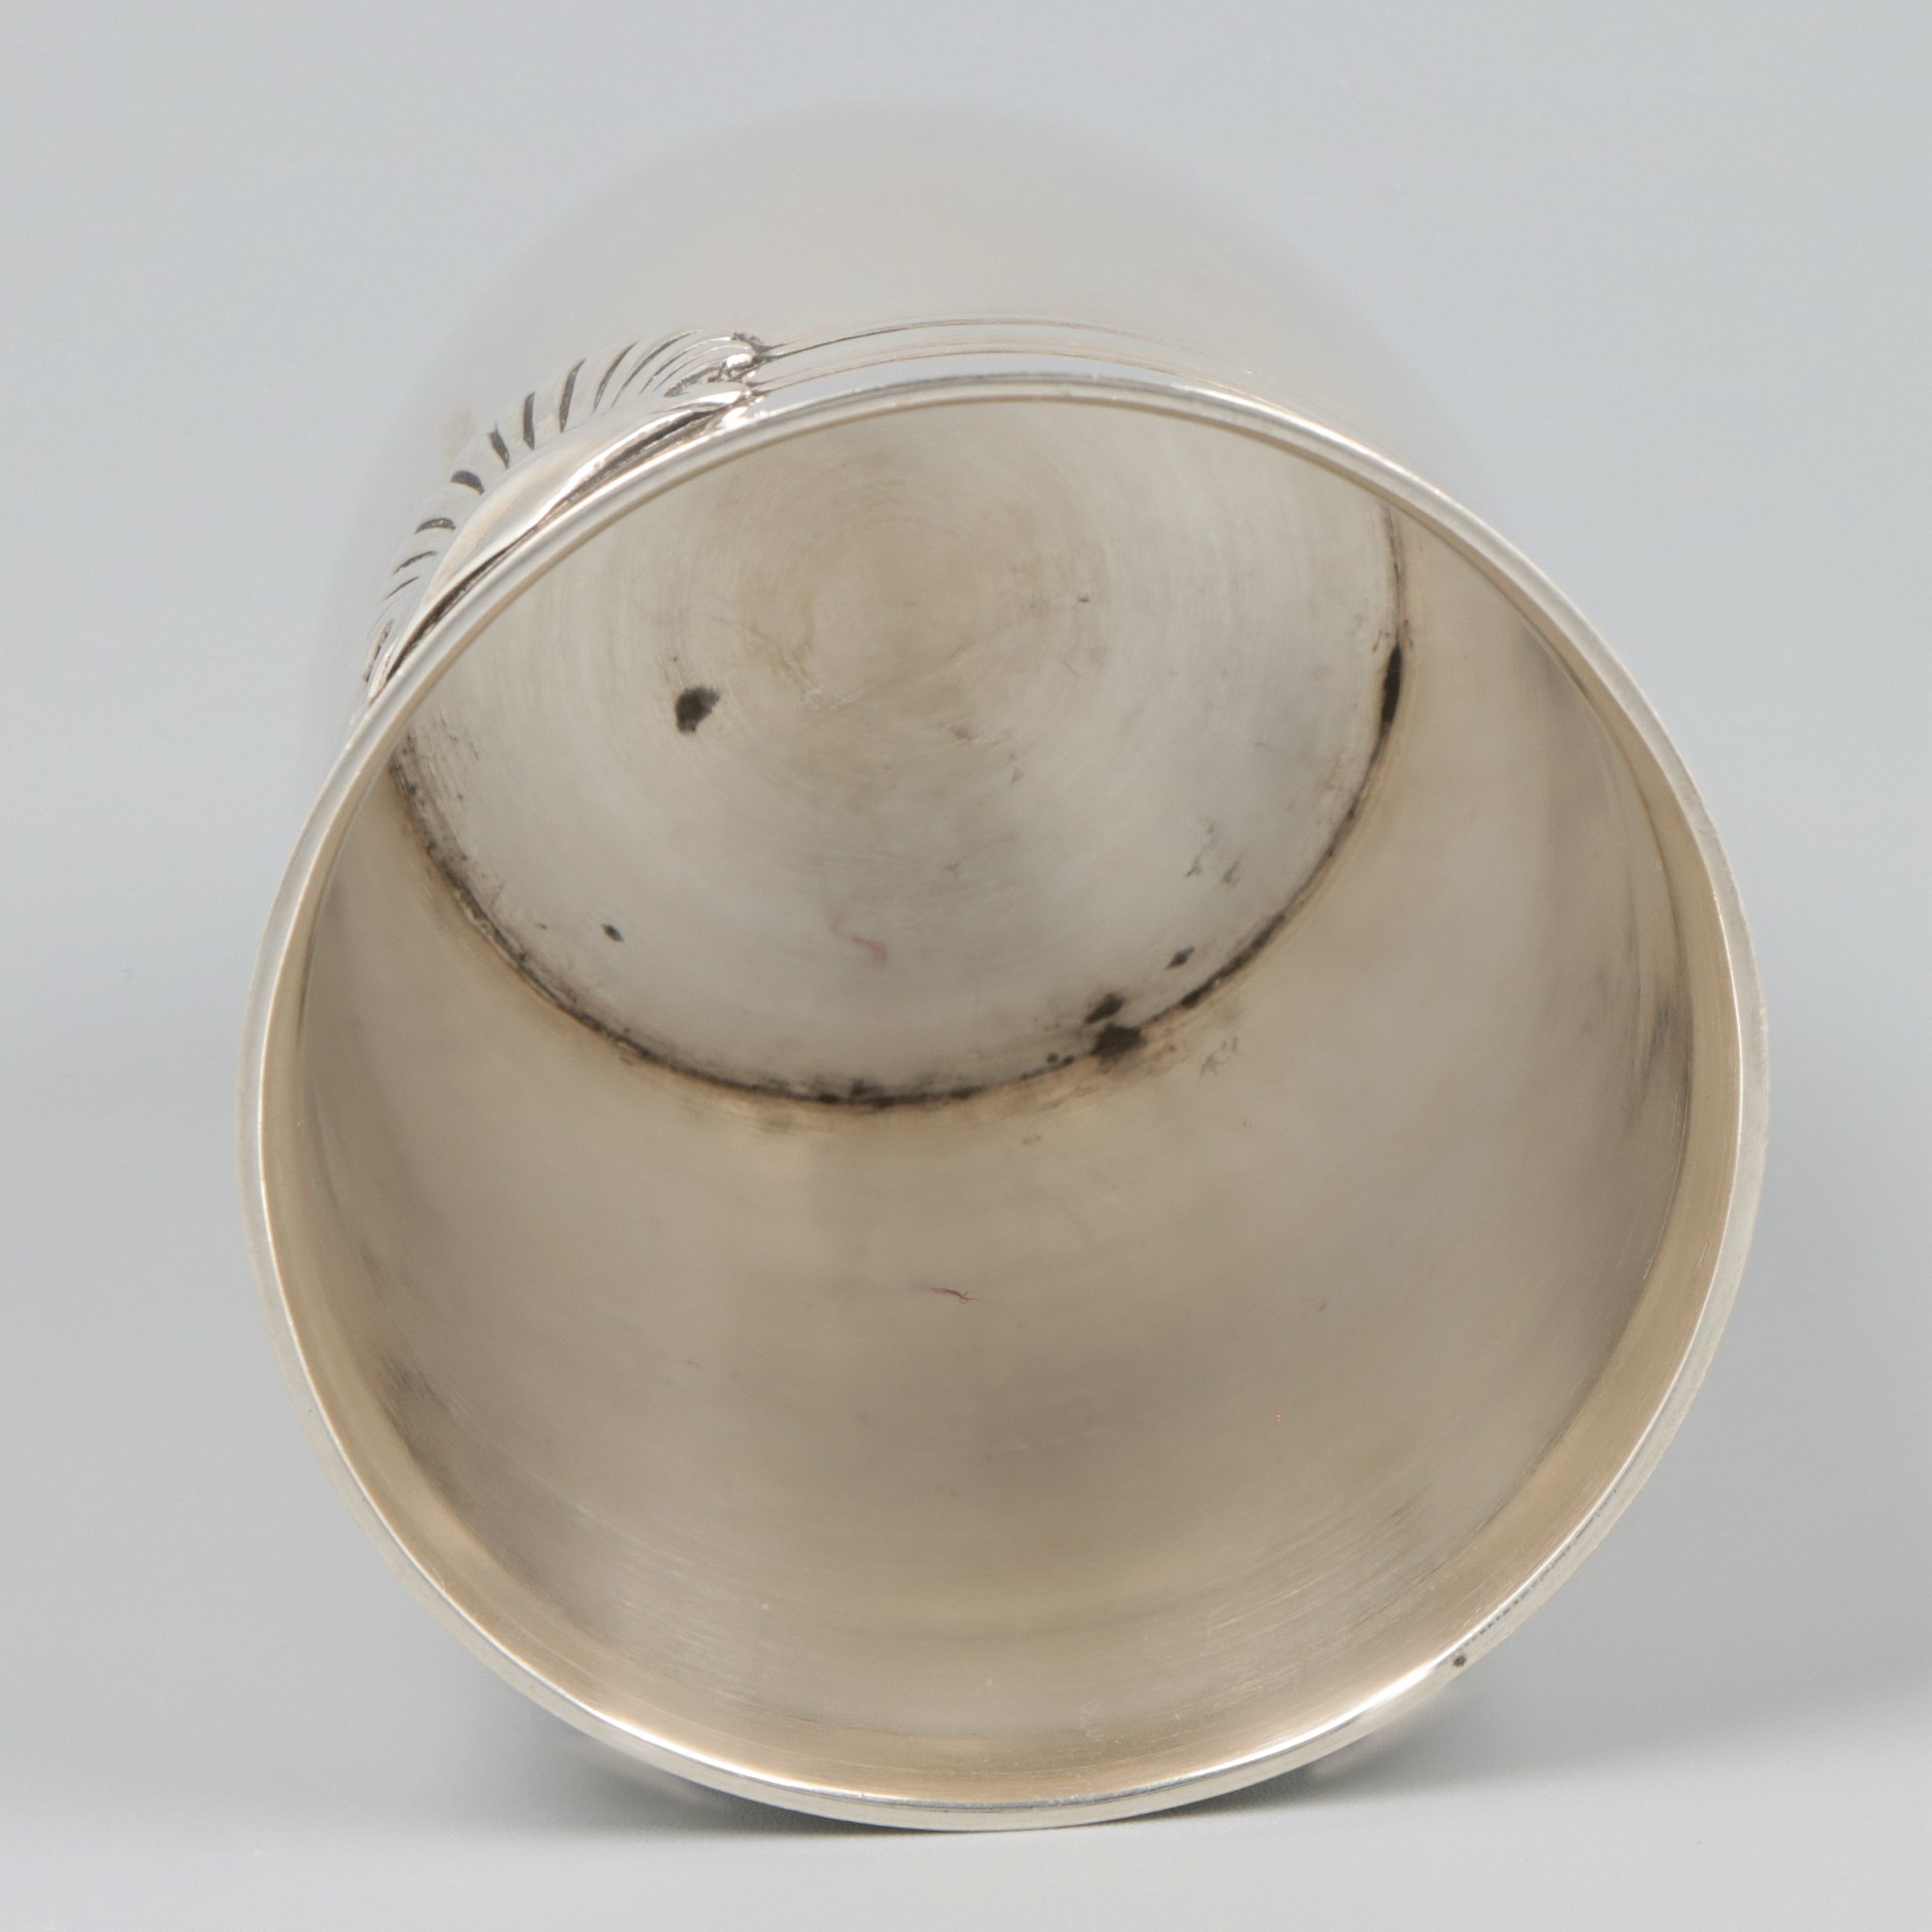 Drinking cup silver. - Image 4 of 5